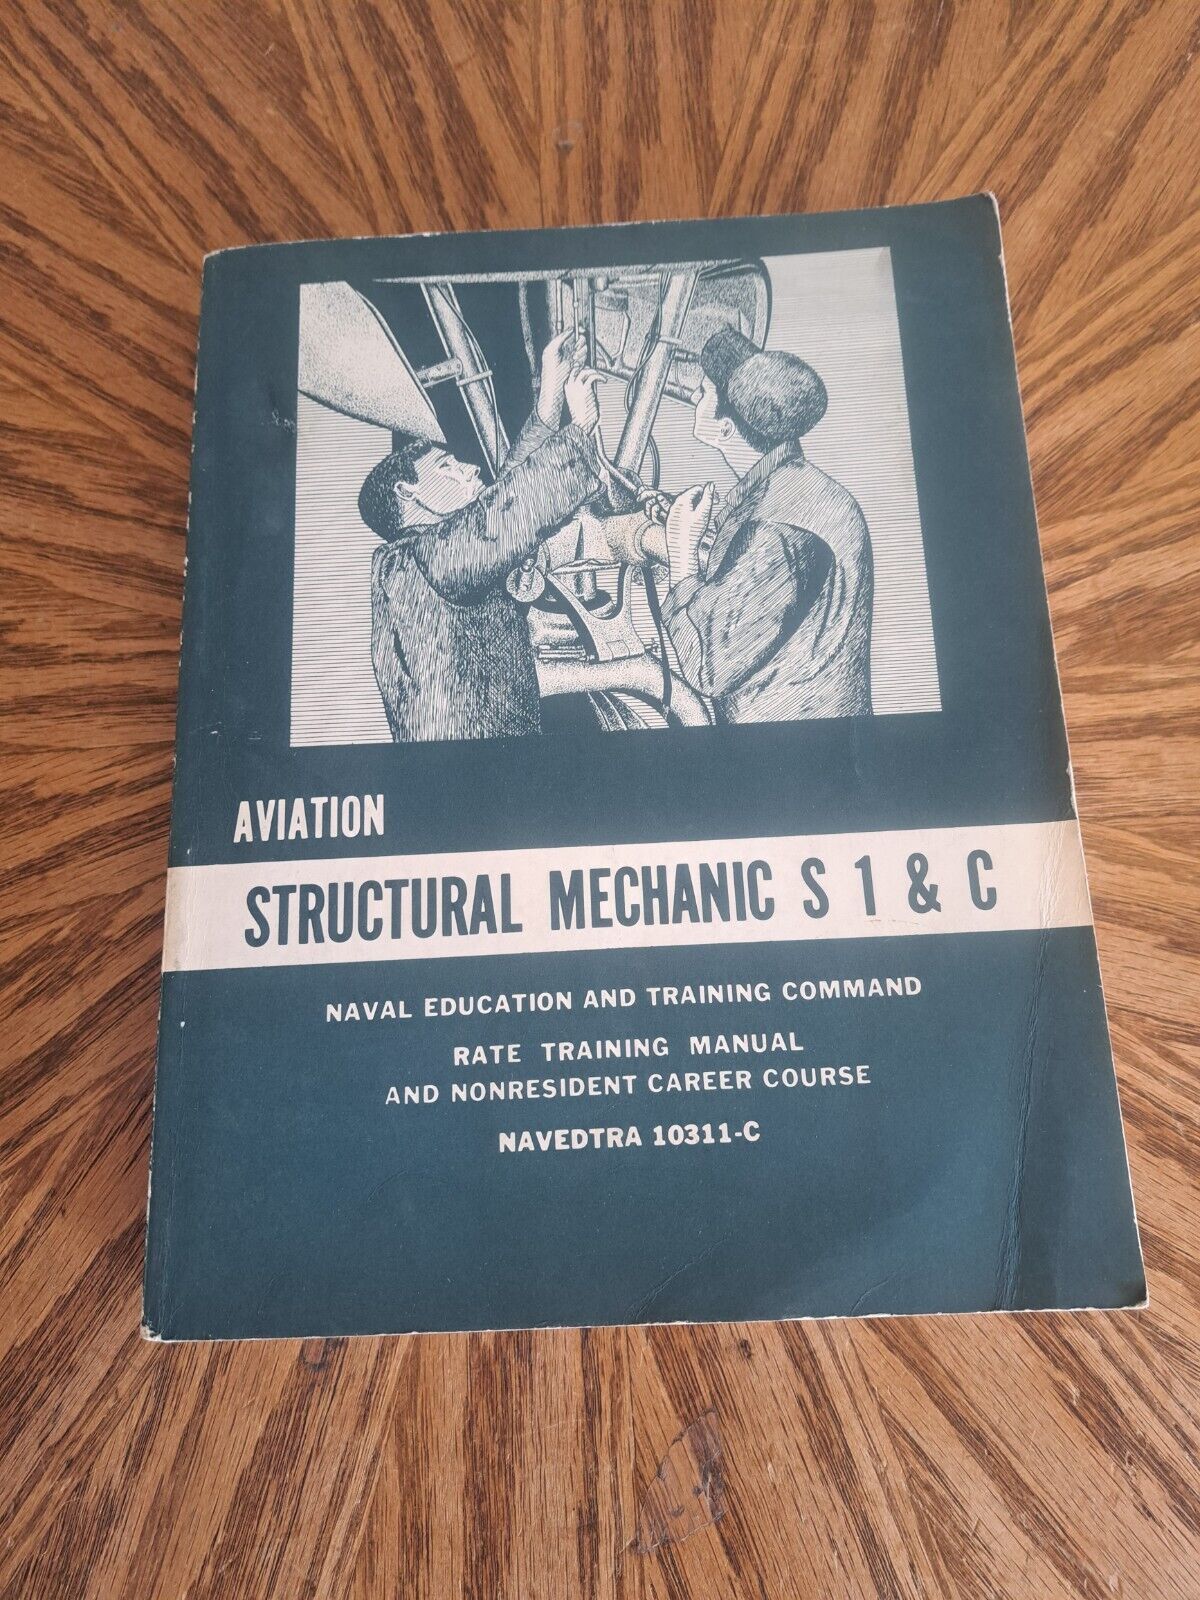 Aviation Structural Mechanic S 1 & C 1963 Navy Training Course NAVPERS 10311